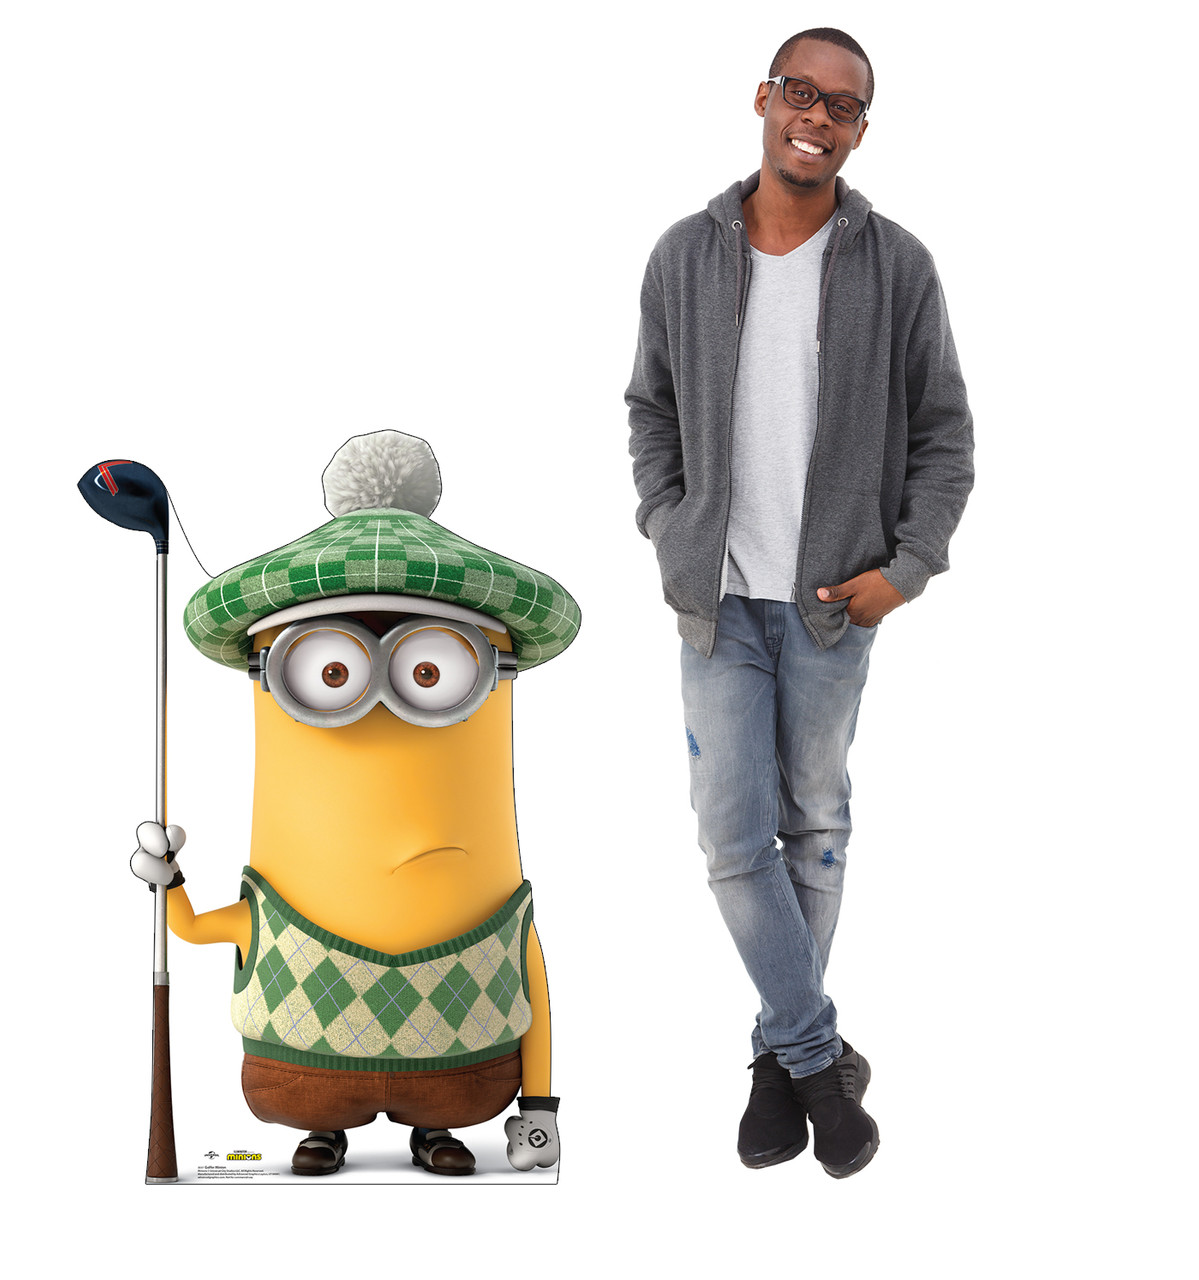 Life-size cardboard standee of Golfer Minion from The Minions with model.